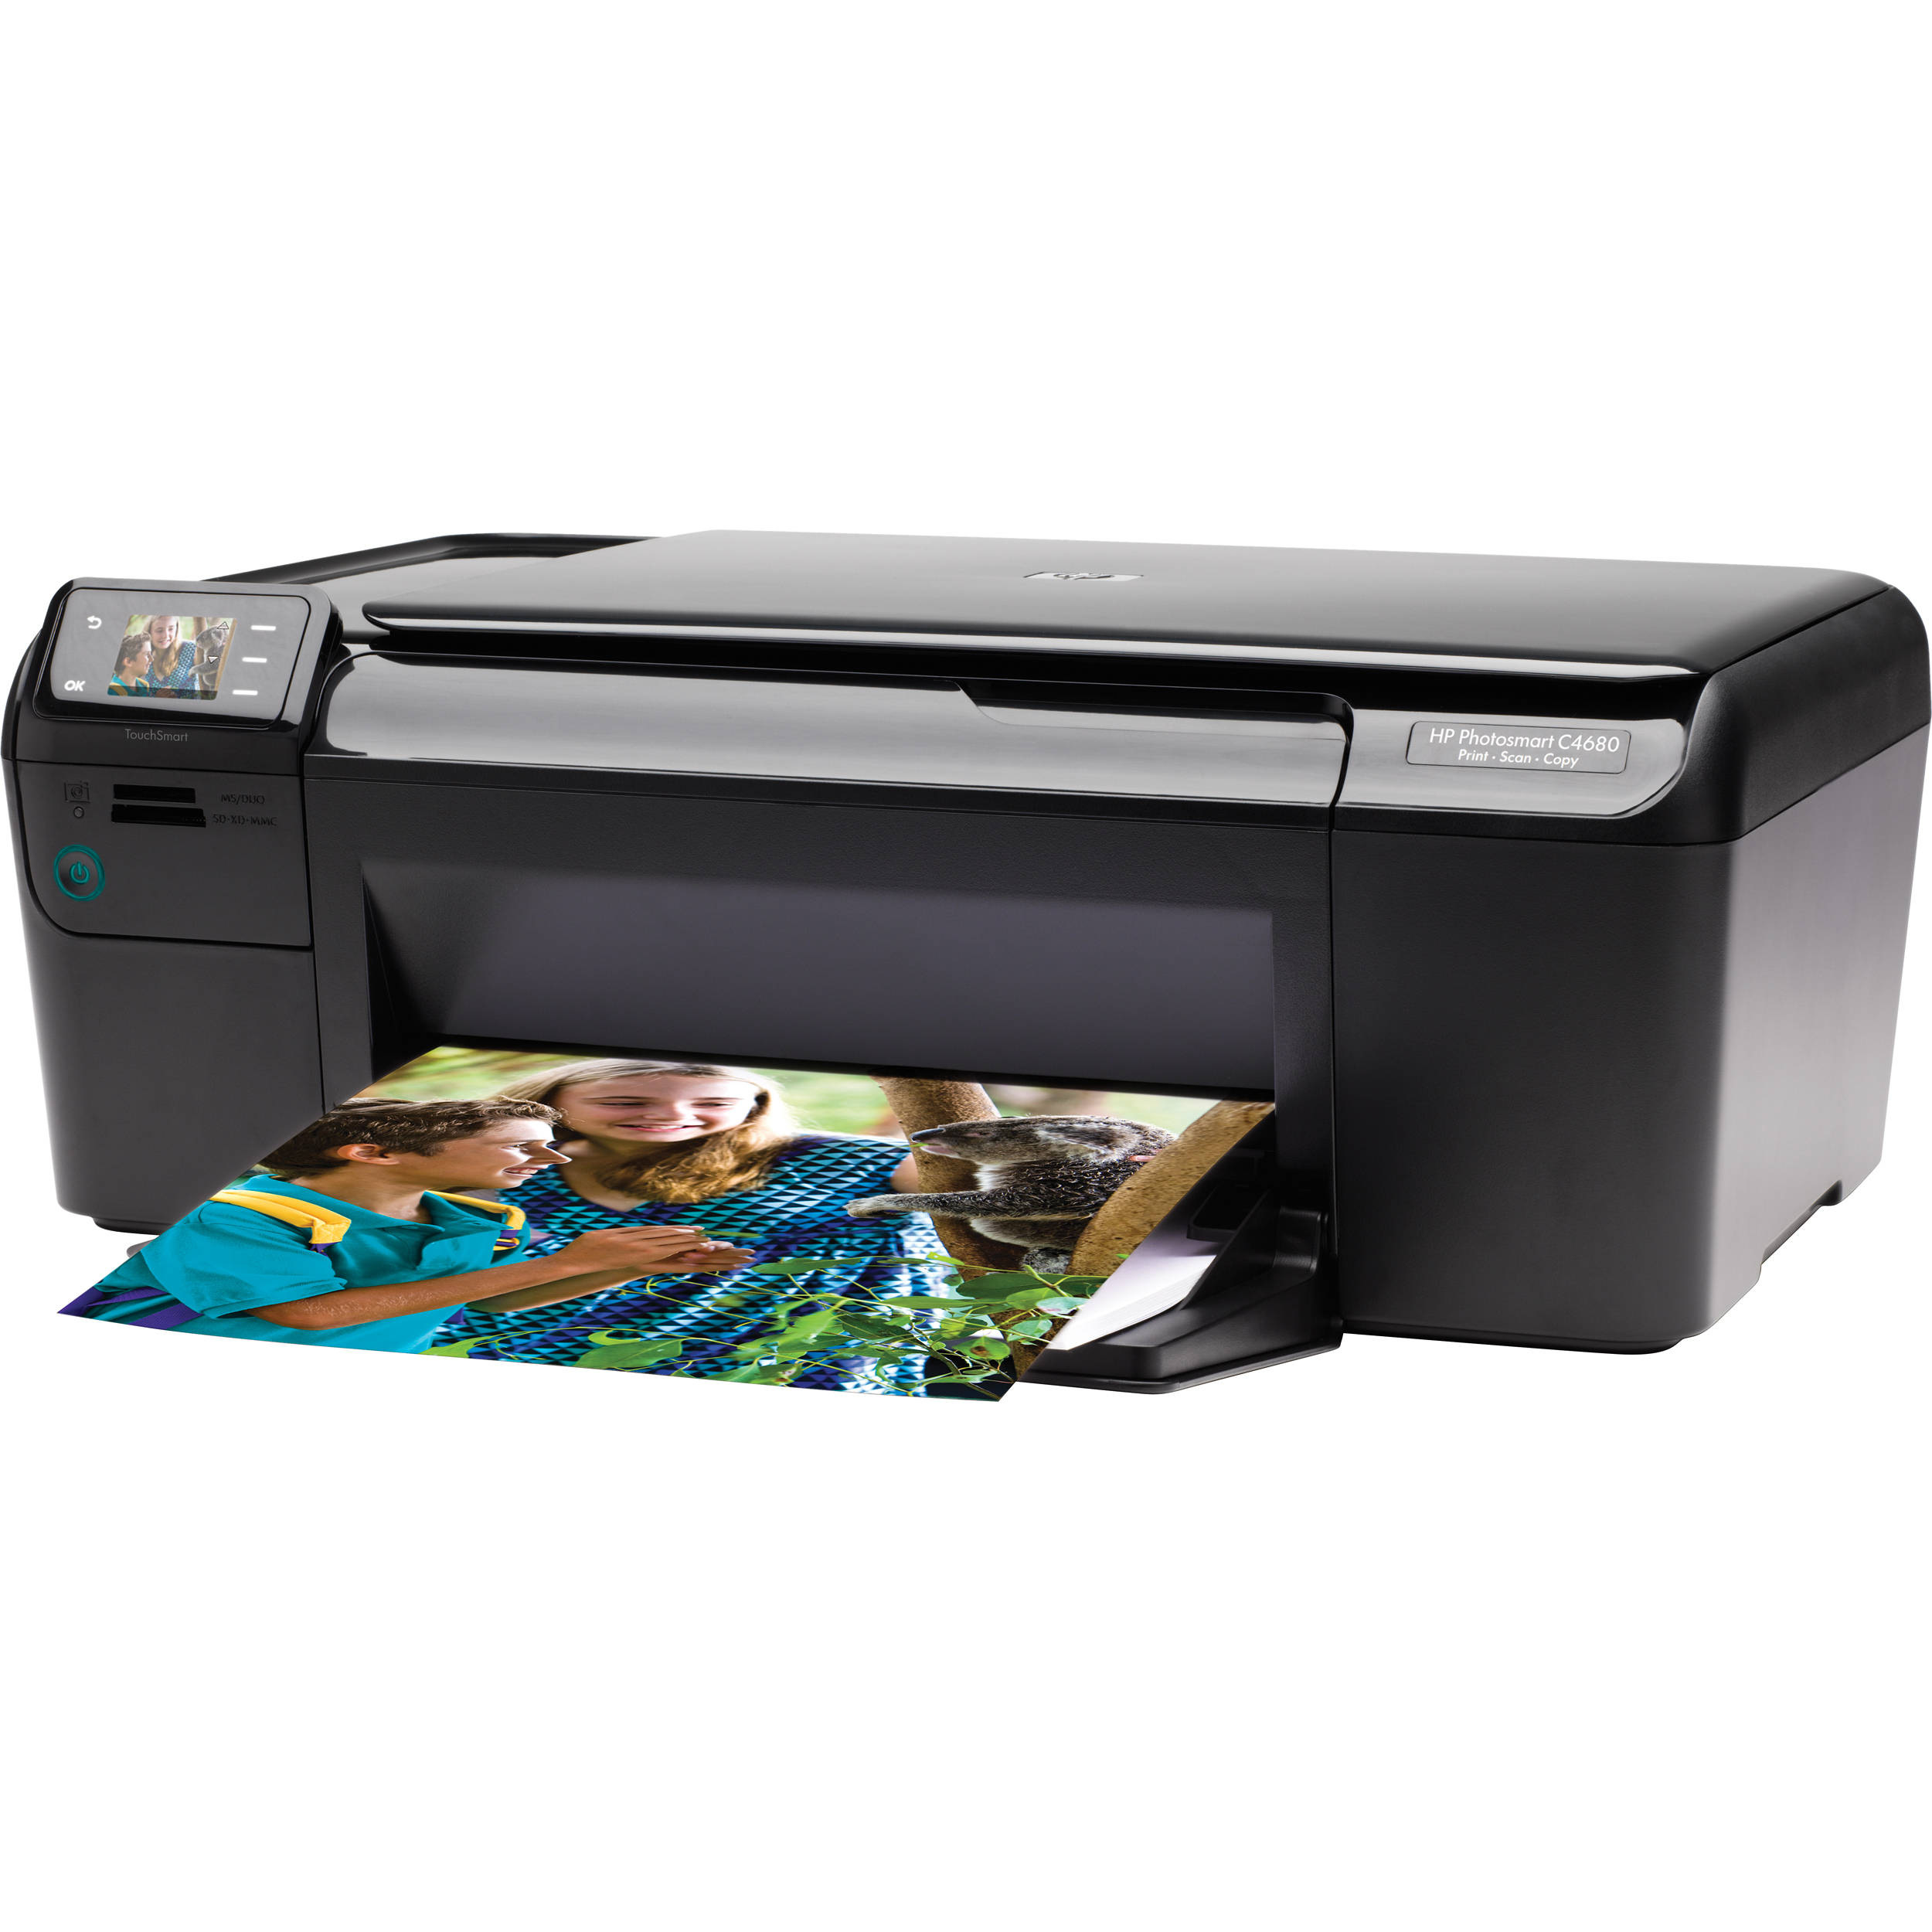 Open All Files Free Download Printer Hp Photosmart C4680 / Open All Files Free Download Printer Hp Photosmart C4680 Hp Photosmart D110 Printer Manuals Download If You Can Not Find A Driver For Your Operating System You Can Ask For